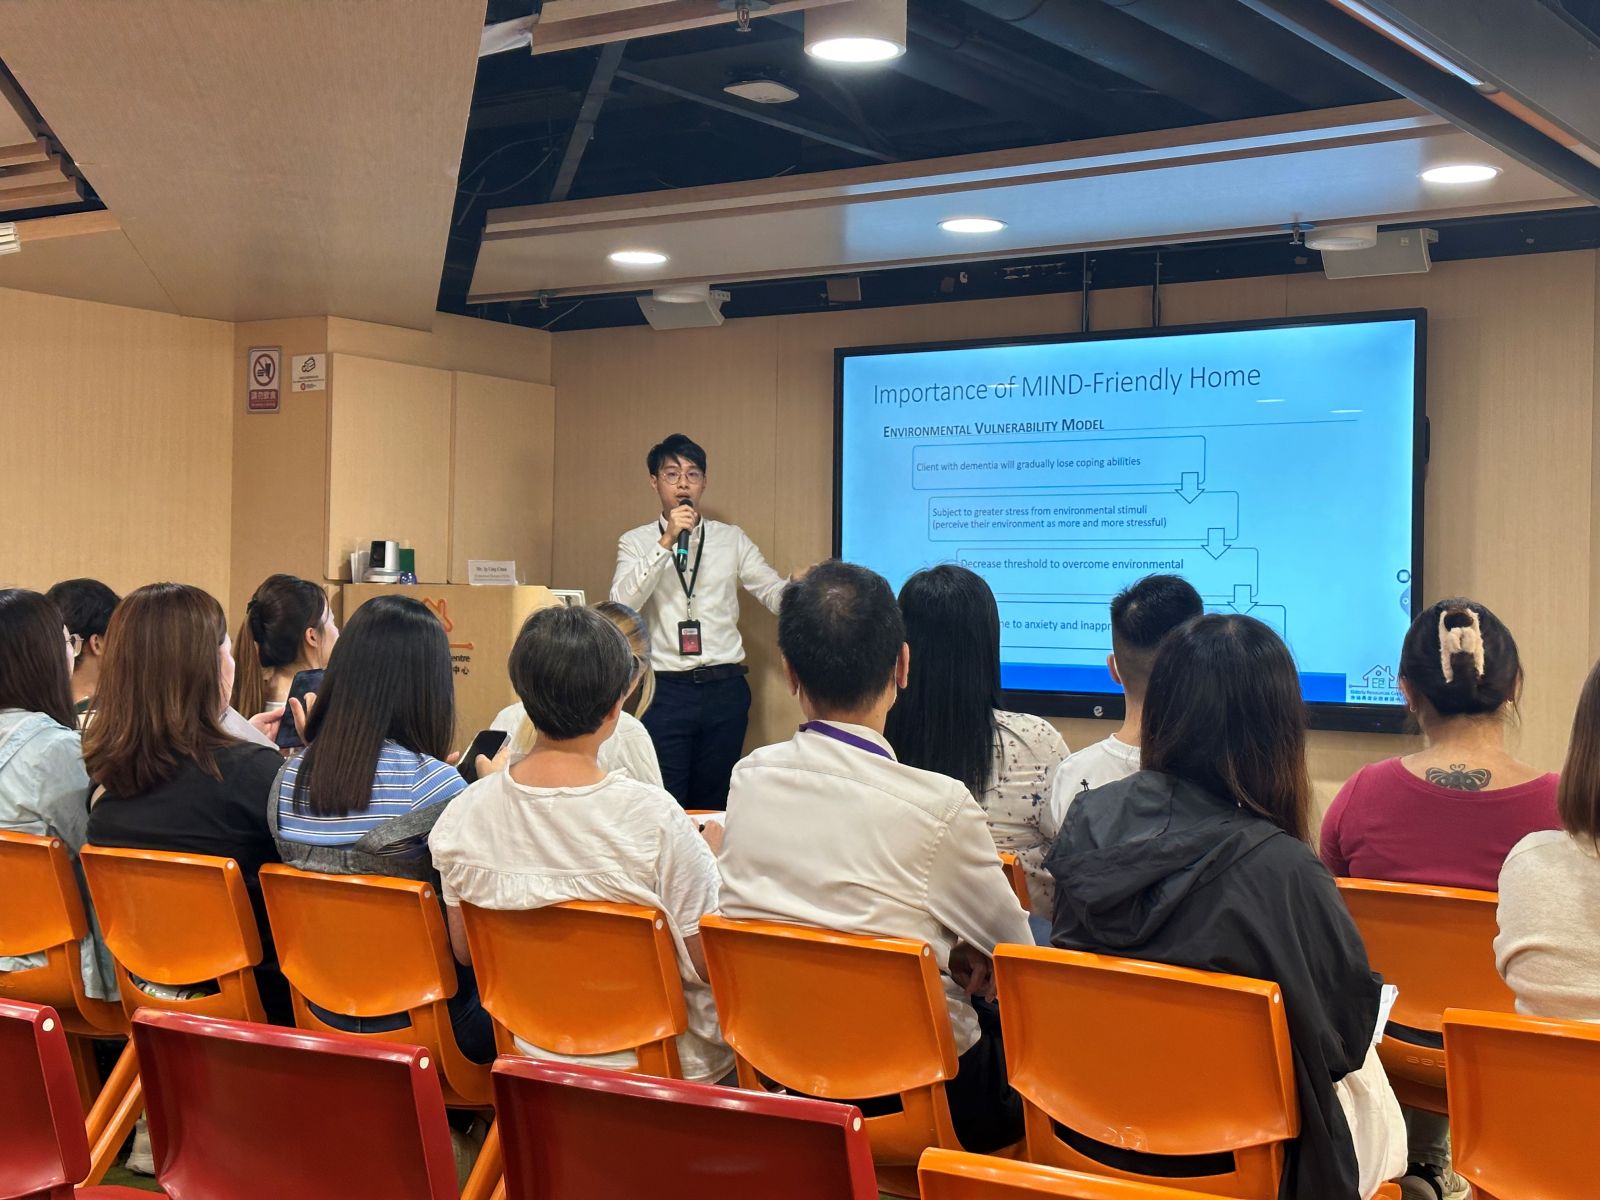 3. Occupational Therapist of our centre Joshua Yip delivered a talk on the concept and application of Mind-friendly Home.